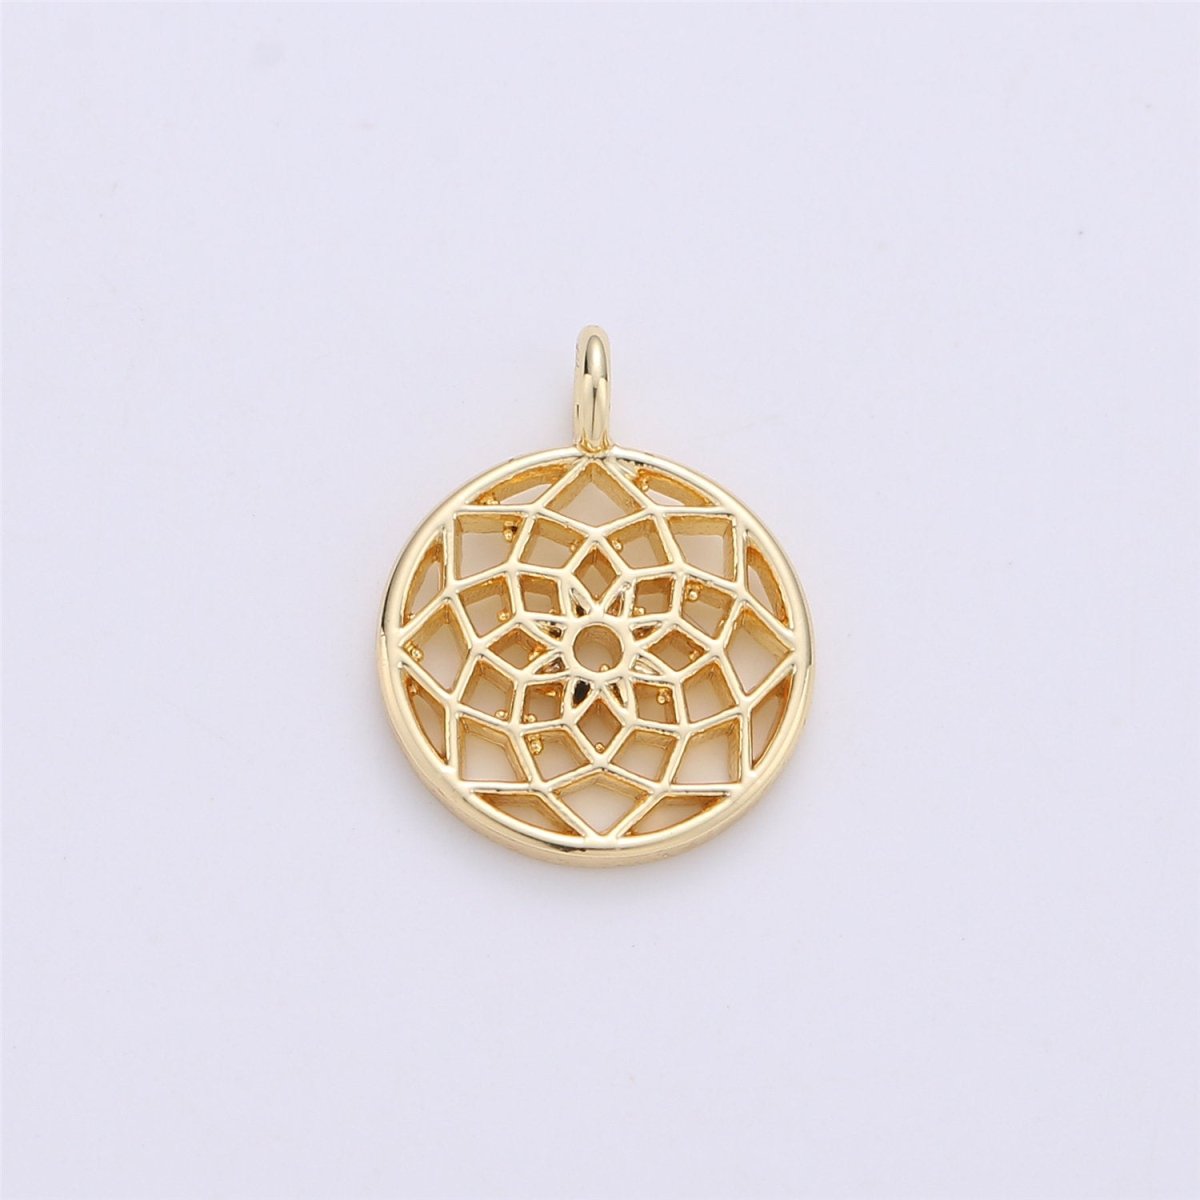 Filigree Flower Charm Gold Filled Dainty Floral Lotus Pendant Origami Flower CharmC-609 - DLUXCA